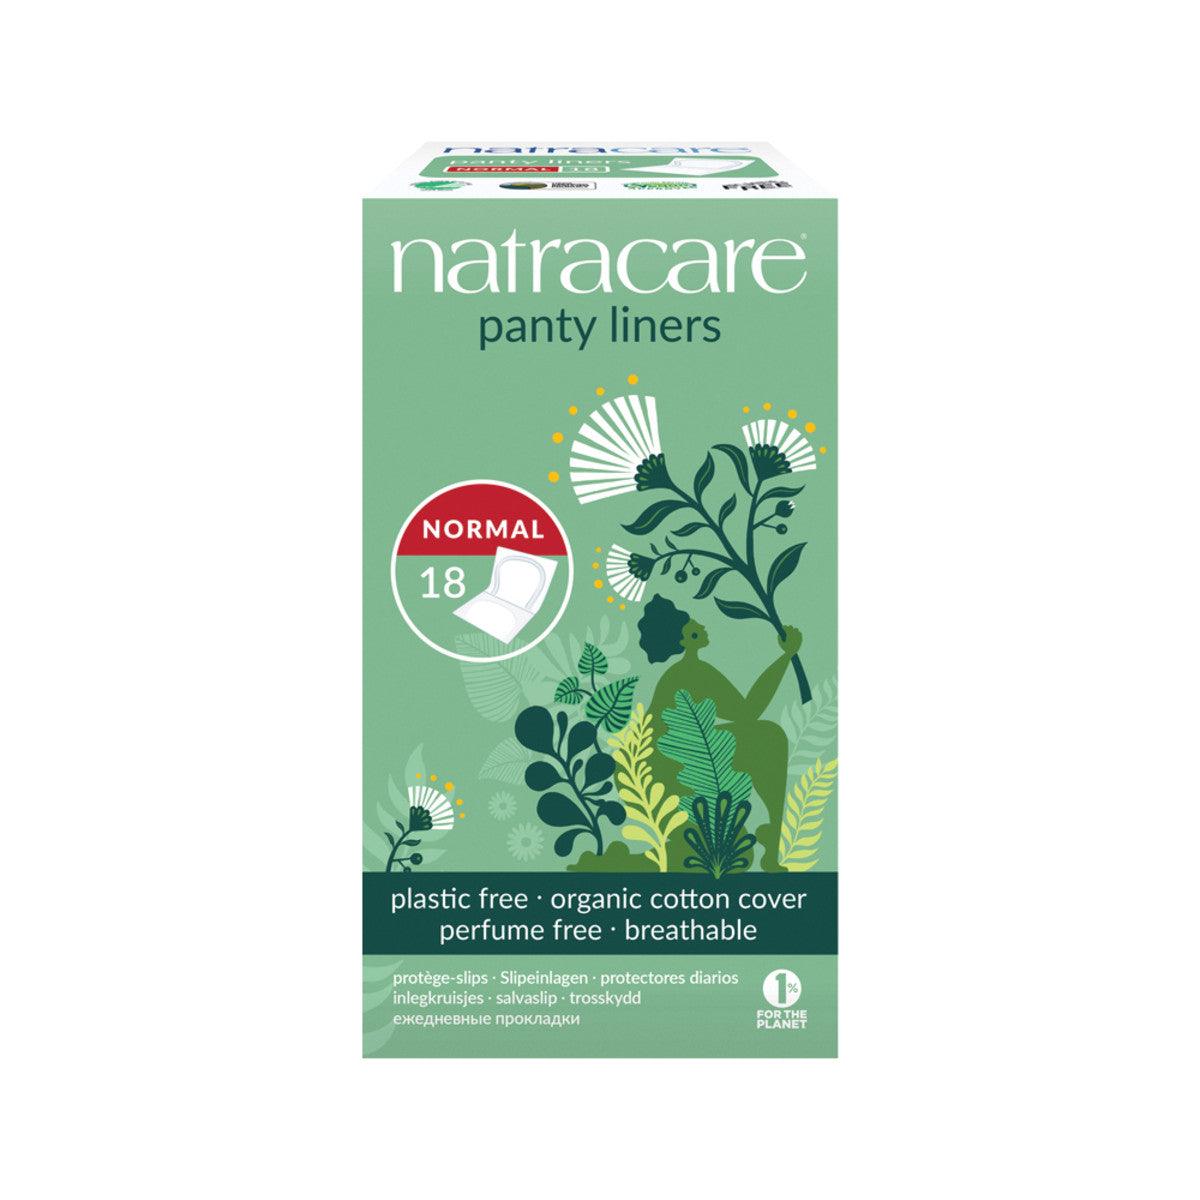 Natracare Panty Liners Normal with Organic Cotton Cover x 18 Pack - QVM Vitamins™